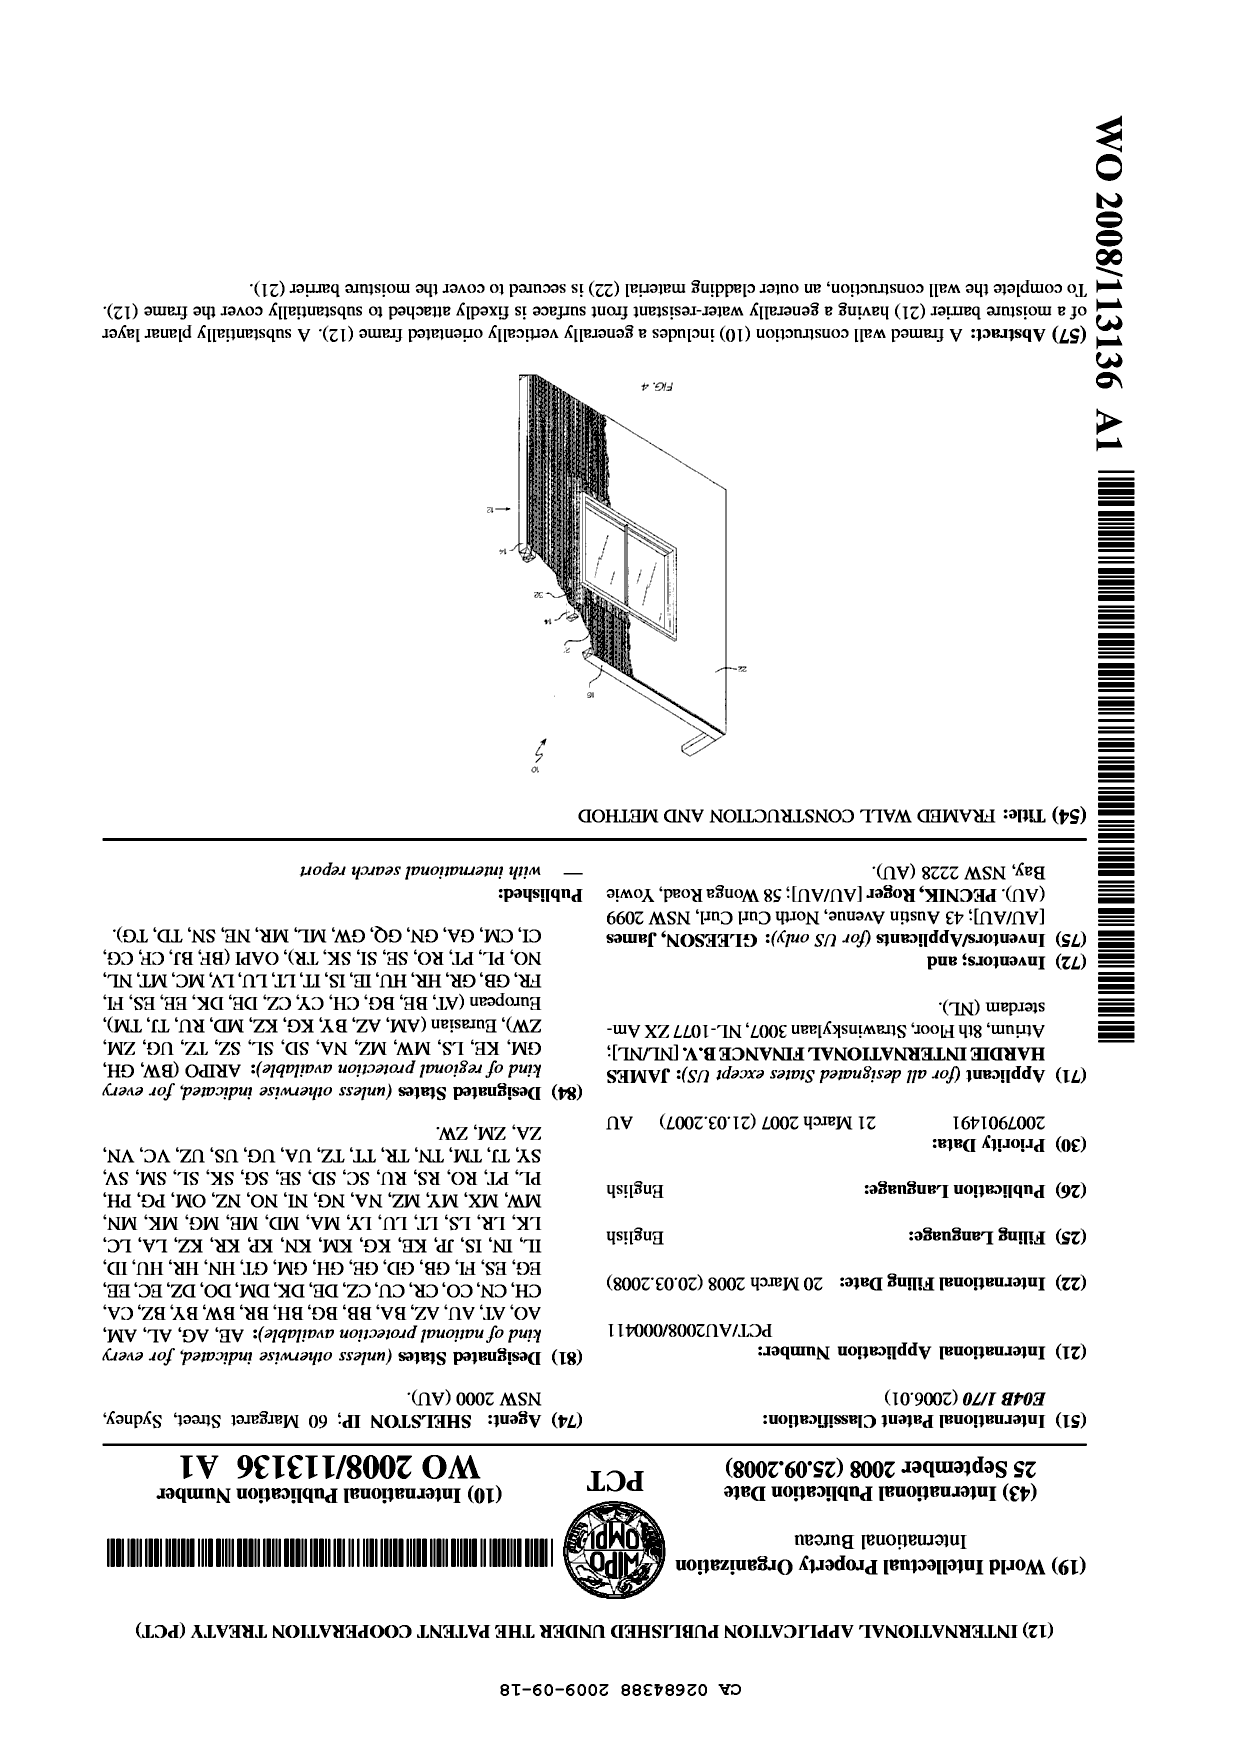 Canadian Patent Document 2684388. Abstract 20090918. Image 1 of 1